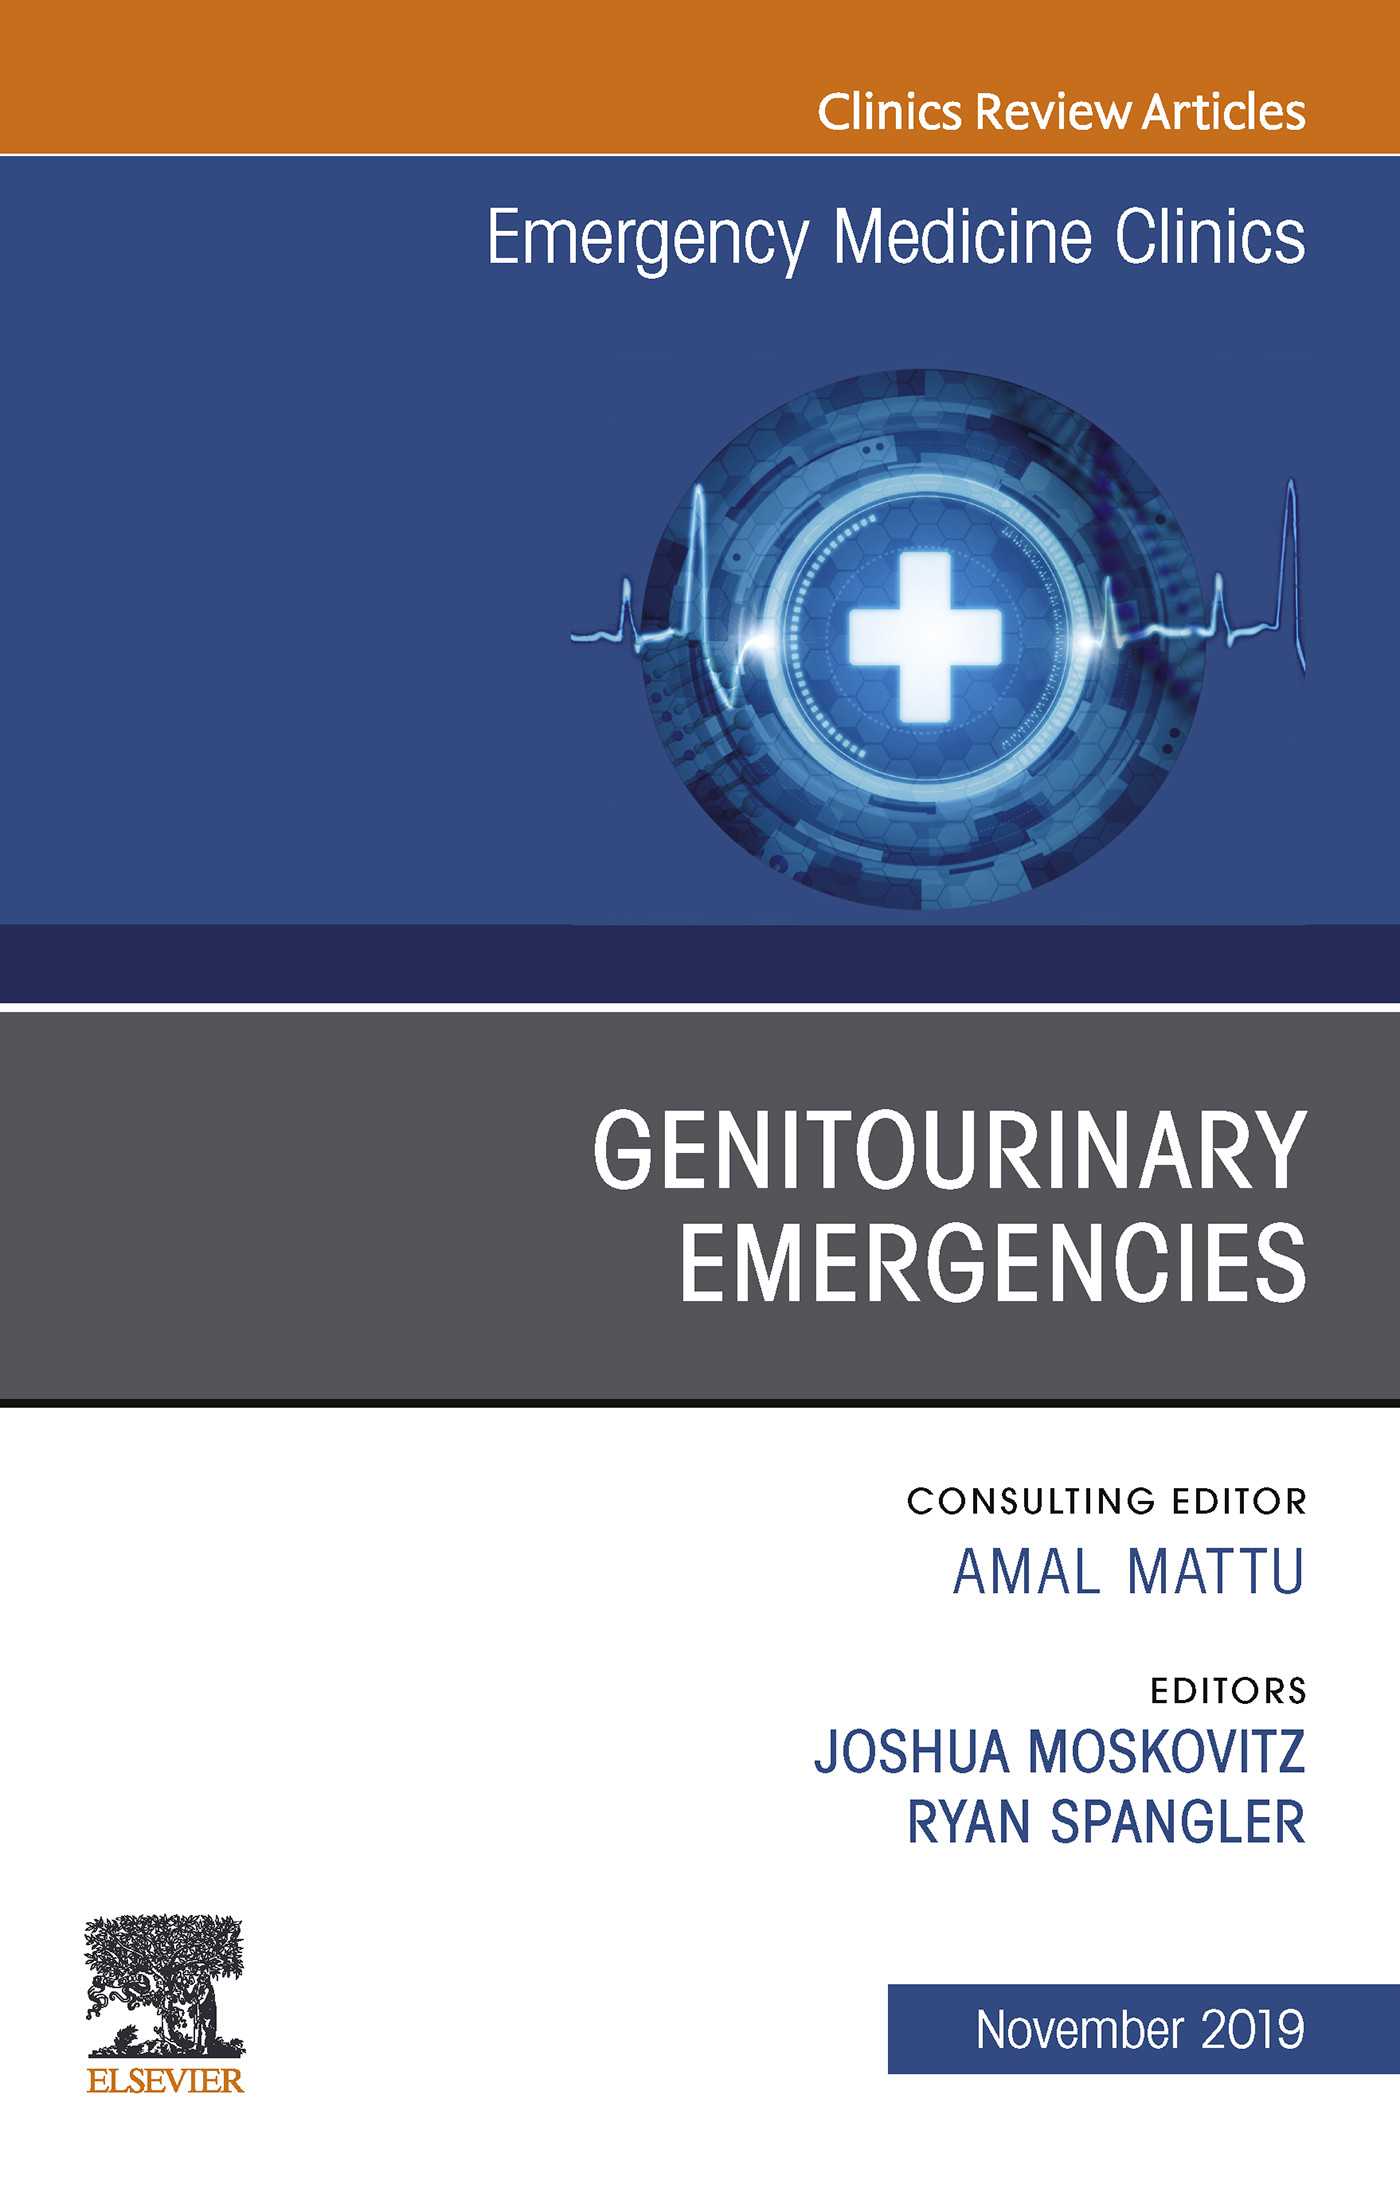 Genitourinary Emergencies, An Issue of Emergency Medicine Clinics of North America